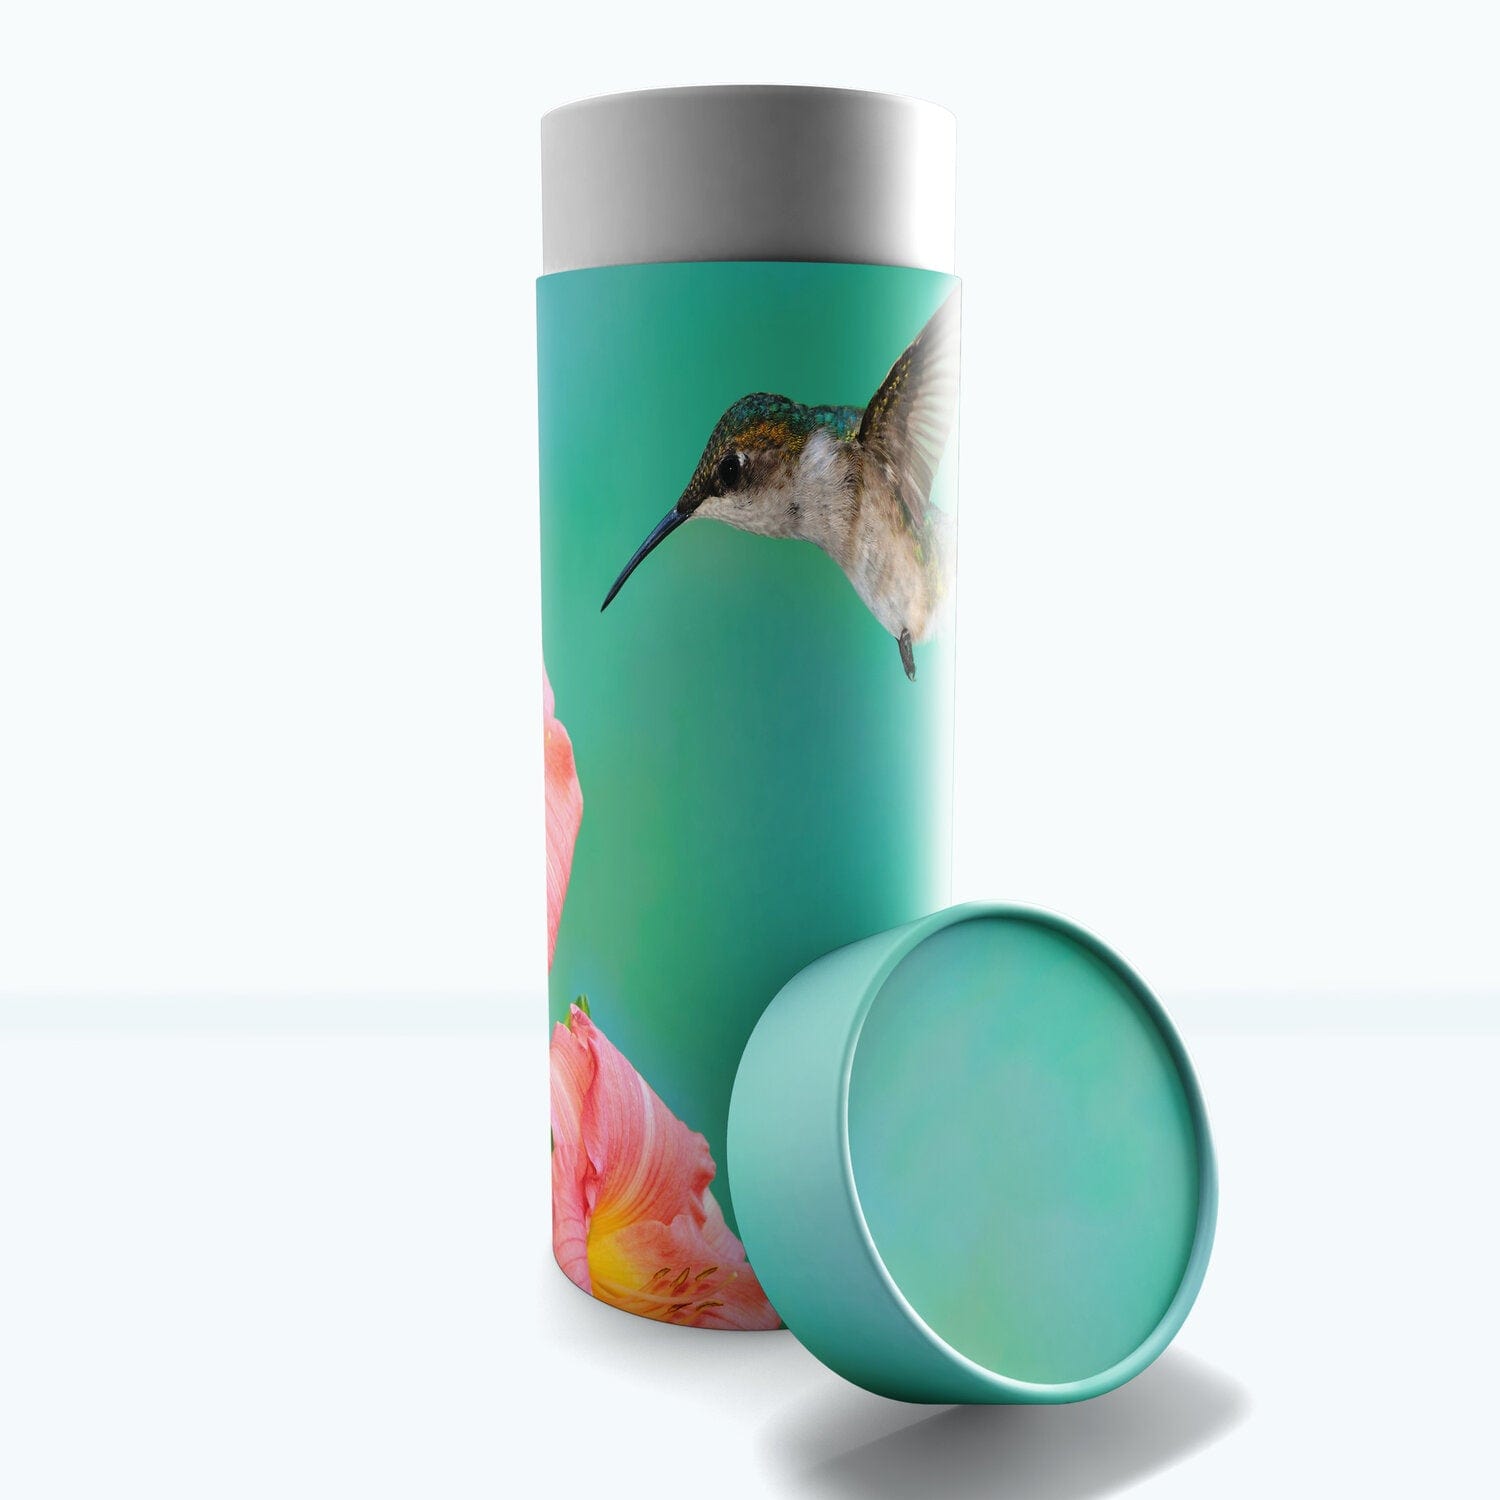 Commemorative Cremation Urns Small Hummingbird Biodegradable & Eco Friendly Burial or Scattering Urn / Tube